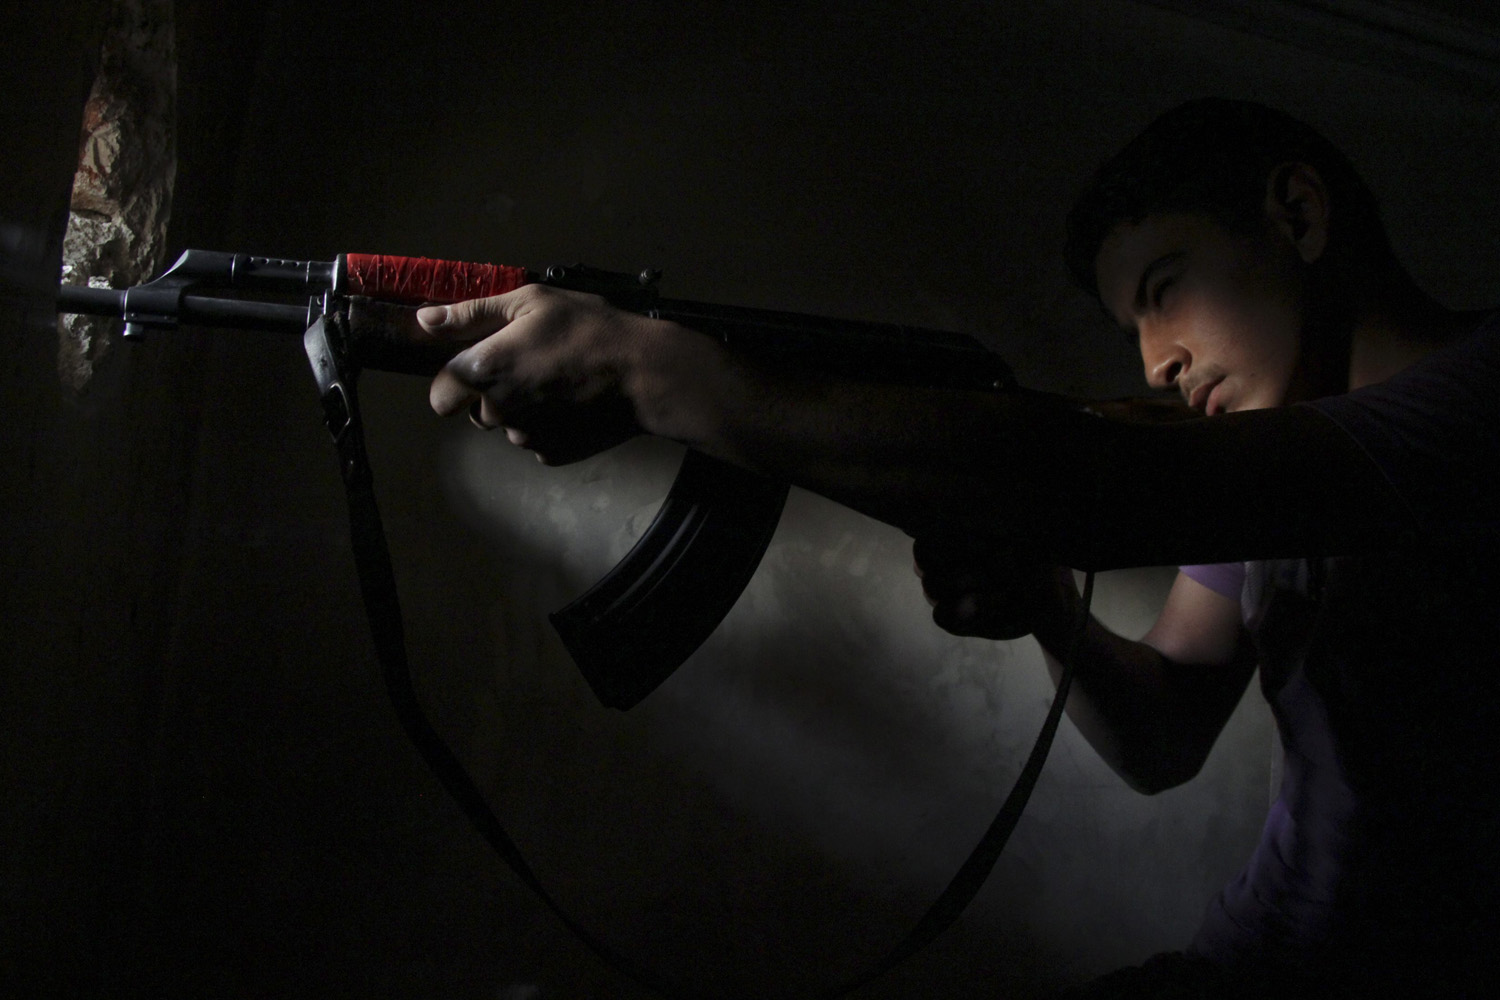 A Free Syrian Army fighter takes up a shooting position in Aleppo